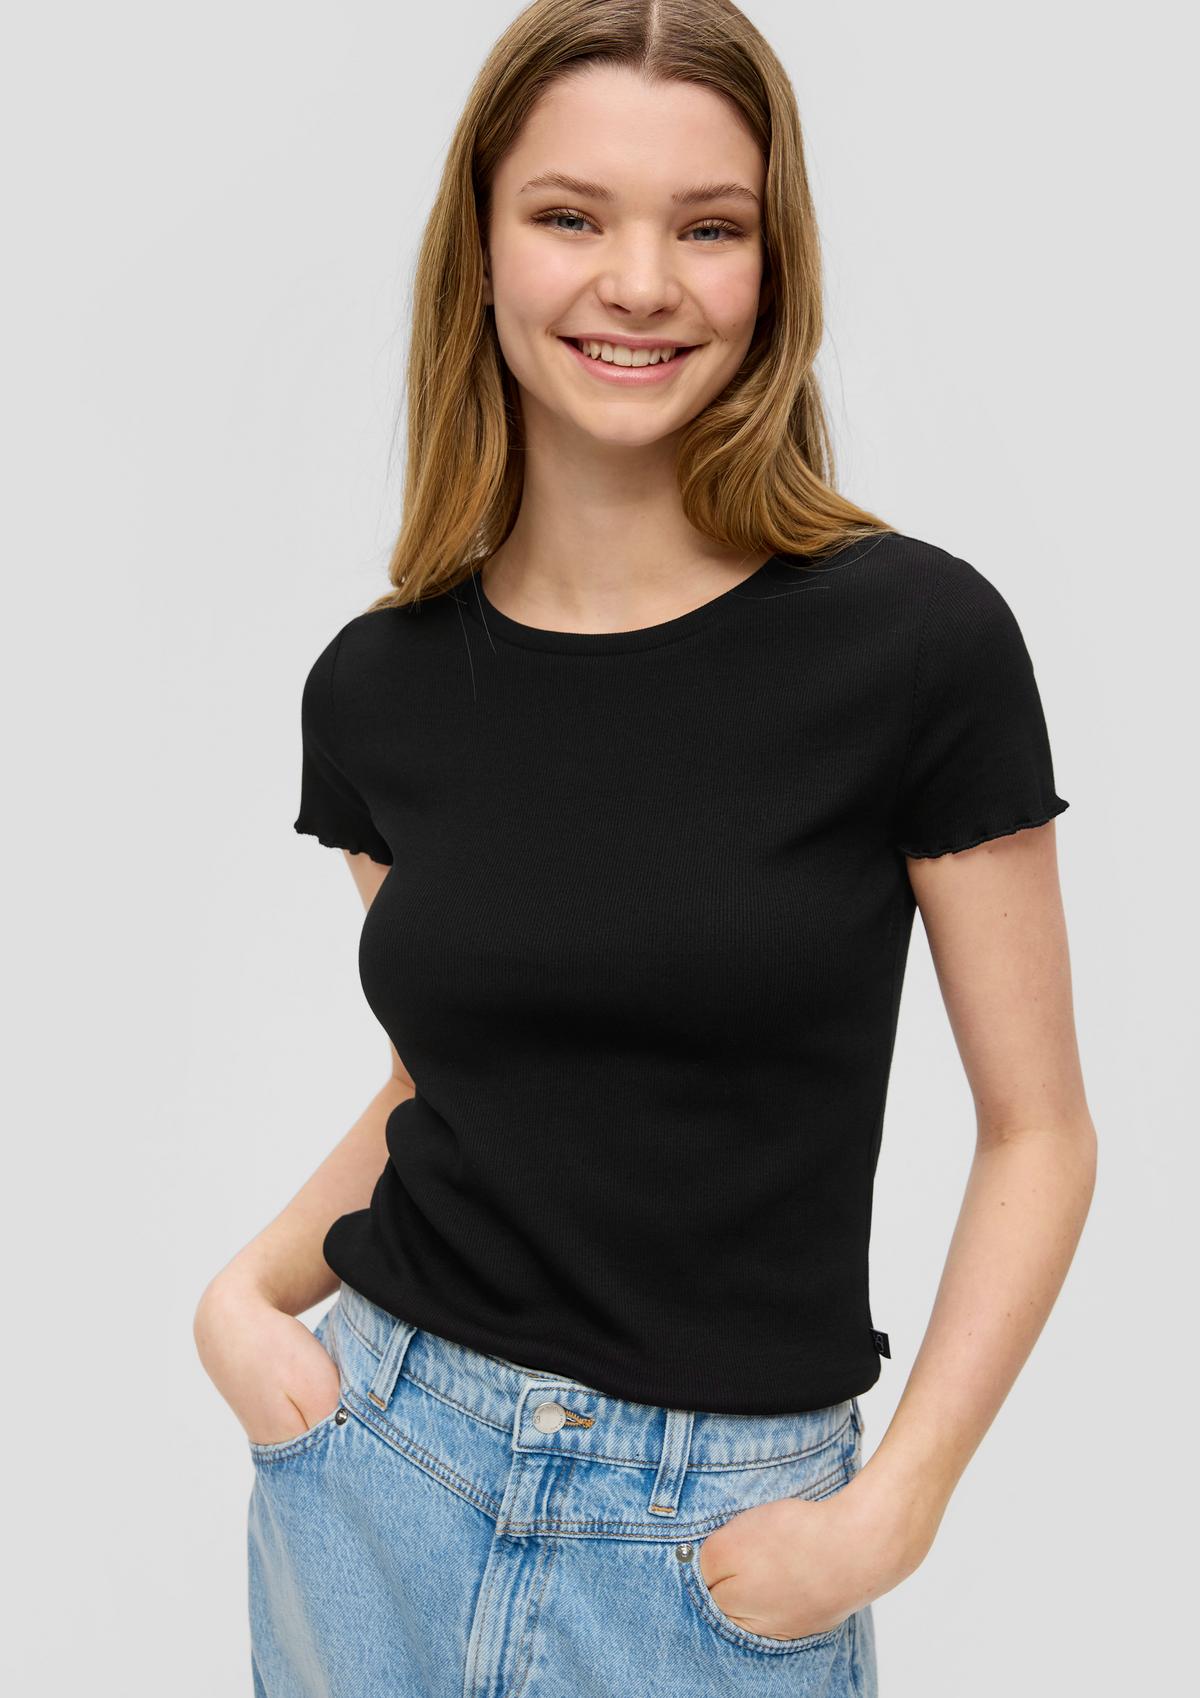 Cropped top with a ribbed texture